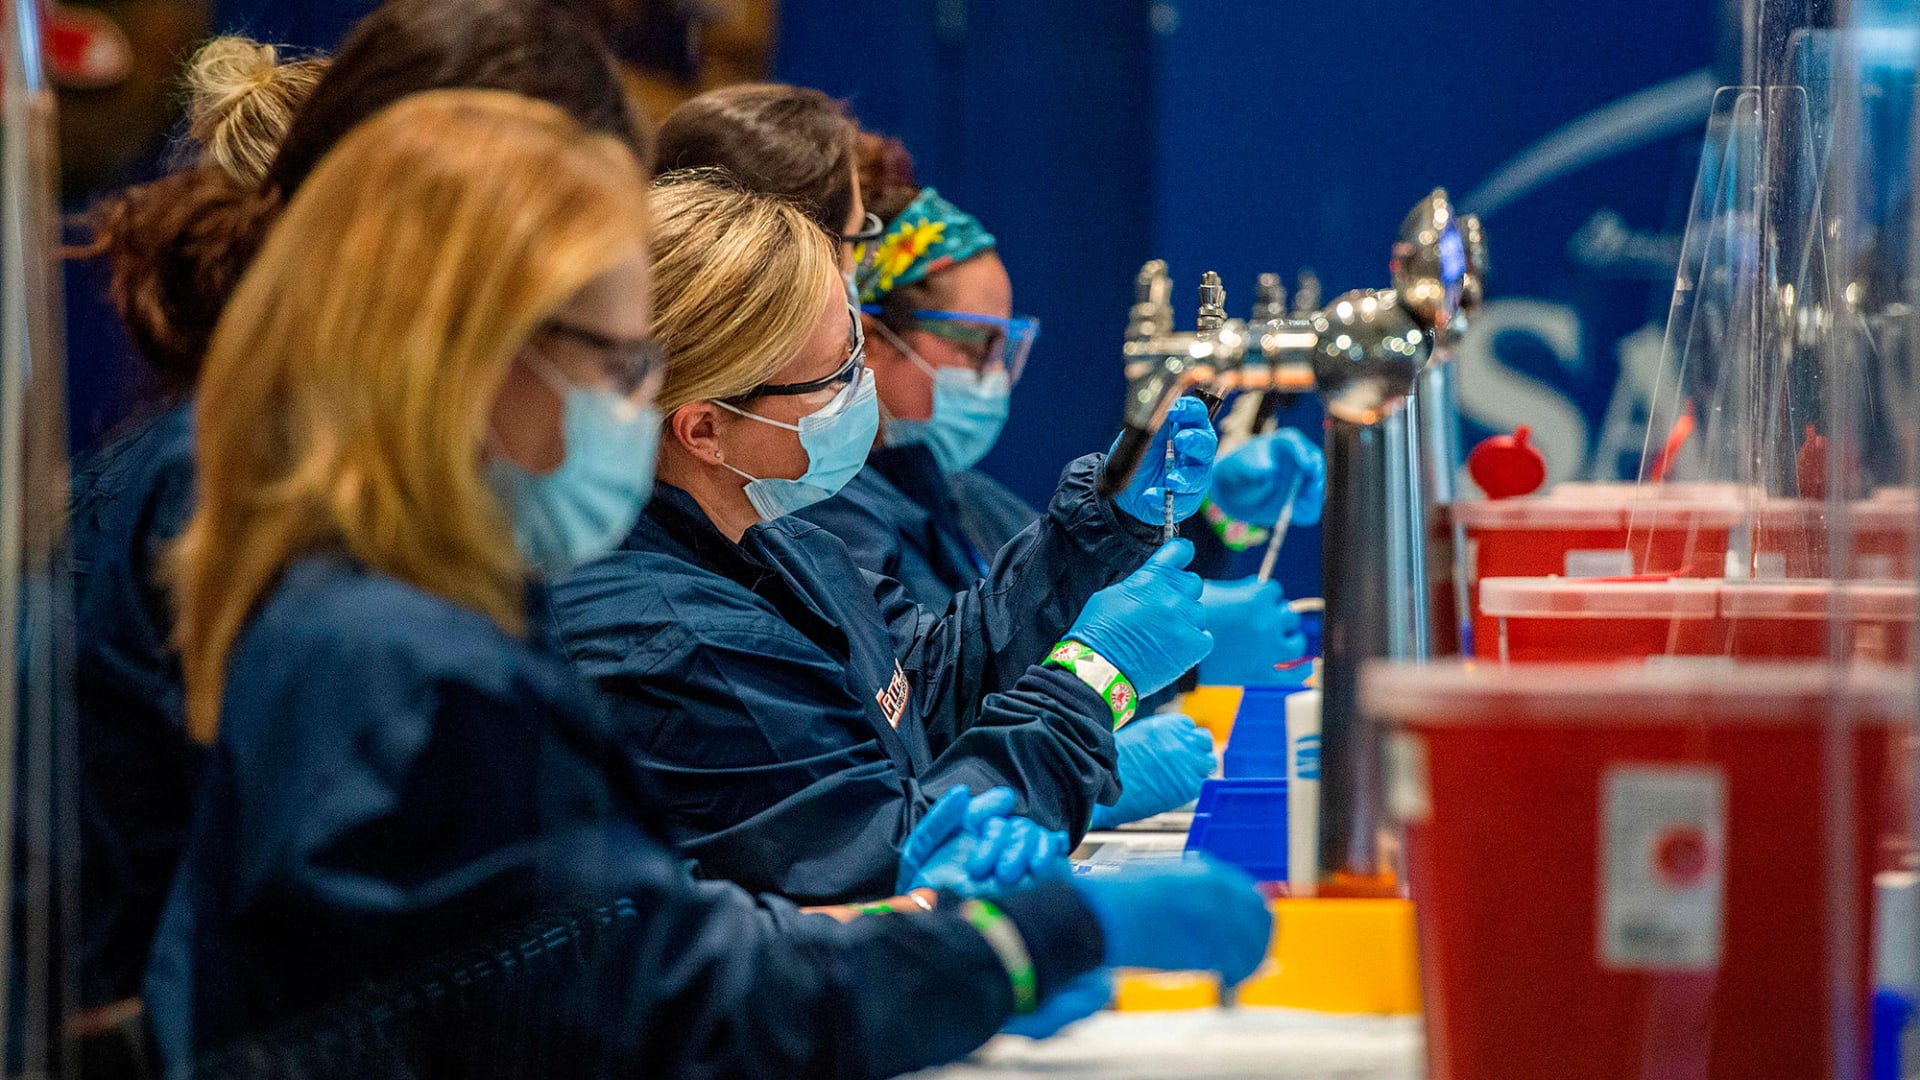 Medical staff workers prepare syringes with doses of the Covid-19 vaccine at Fenway Park in Boston in January.